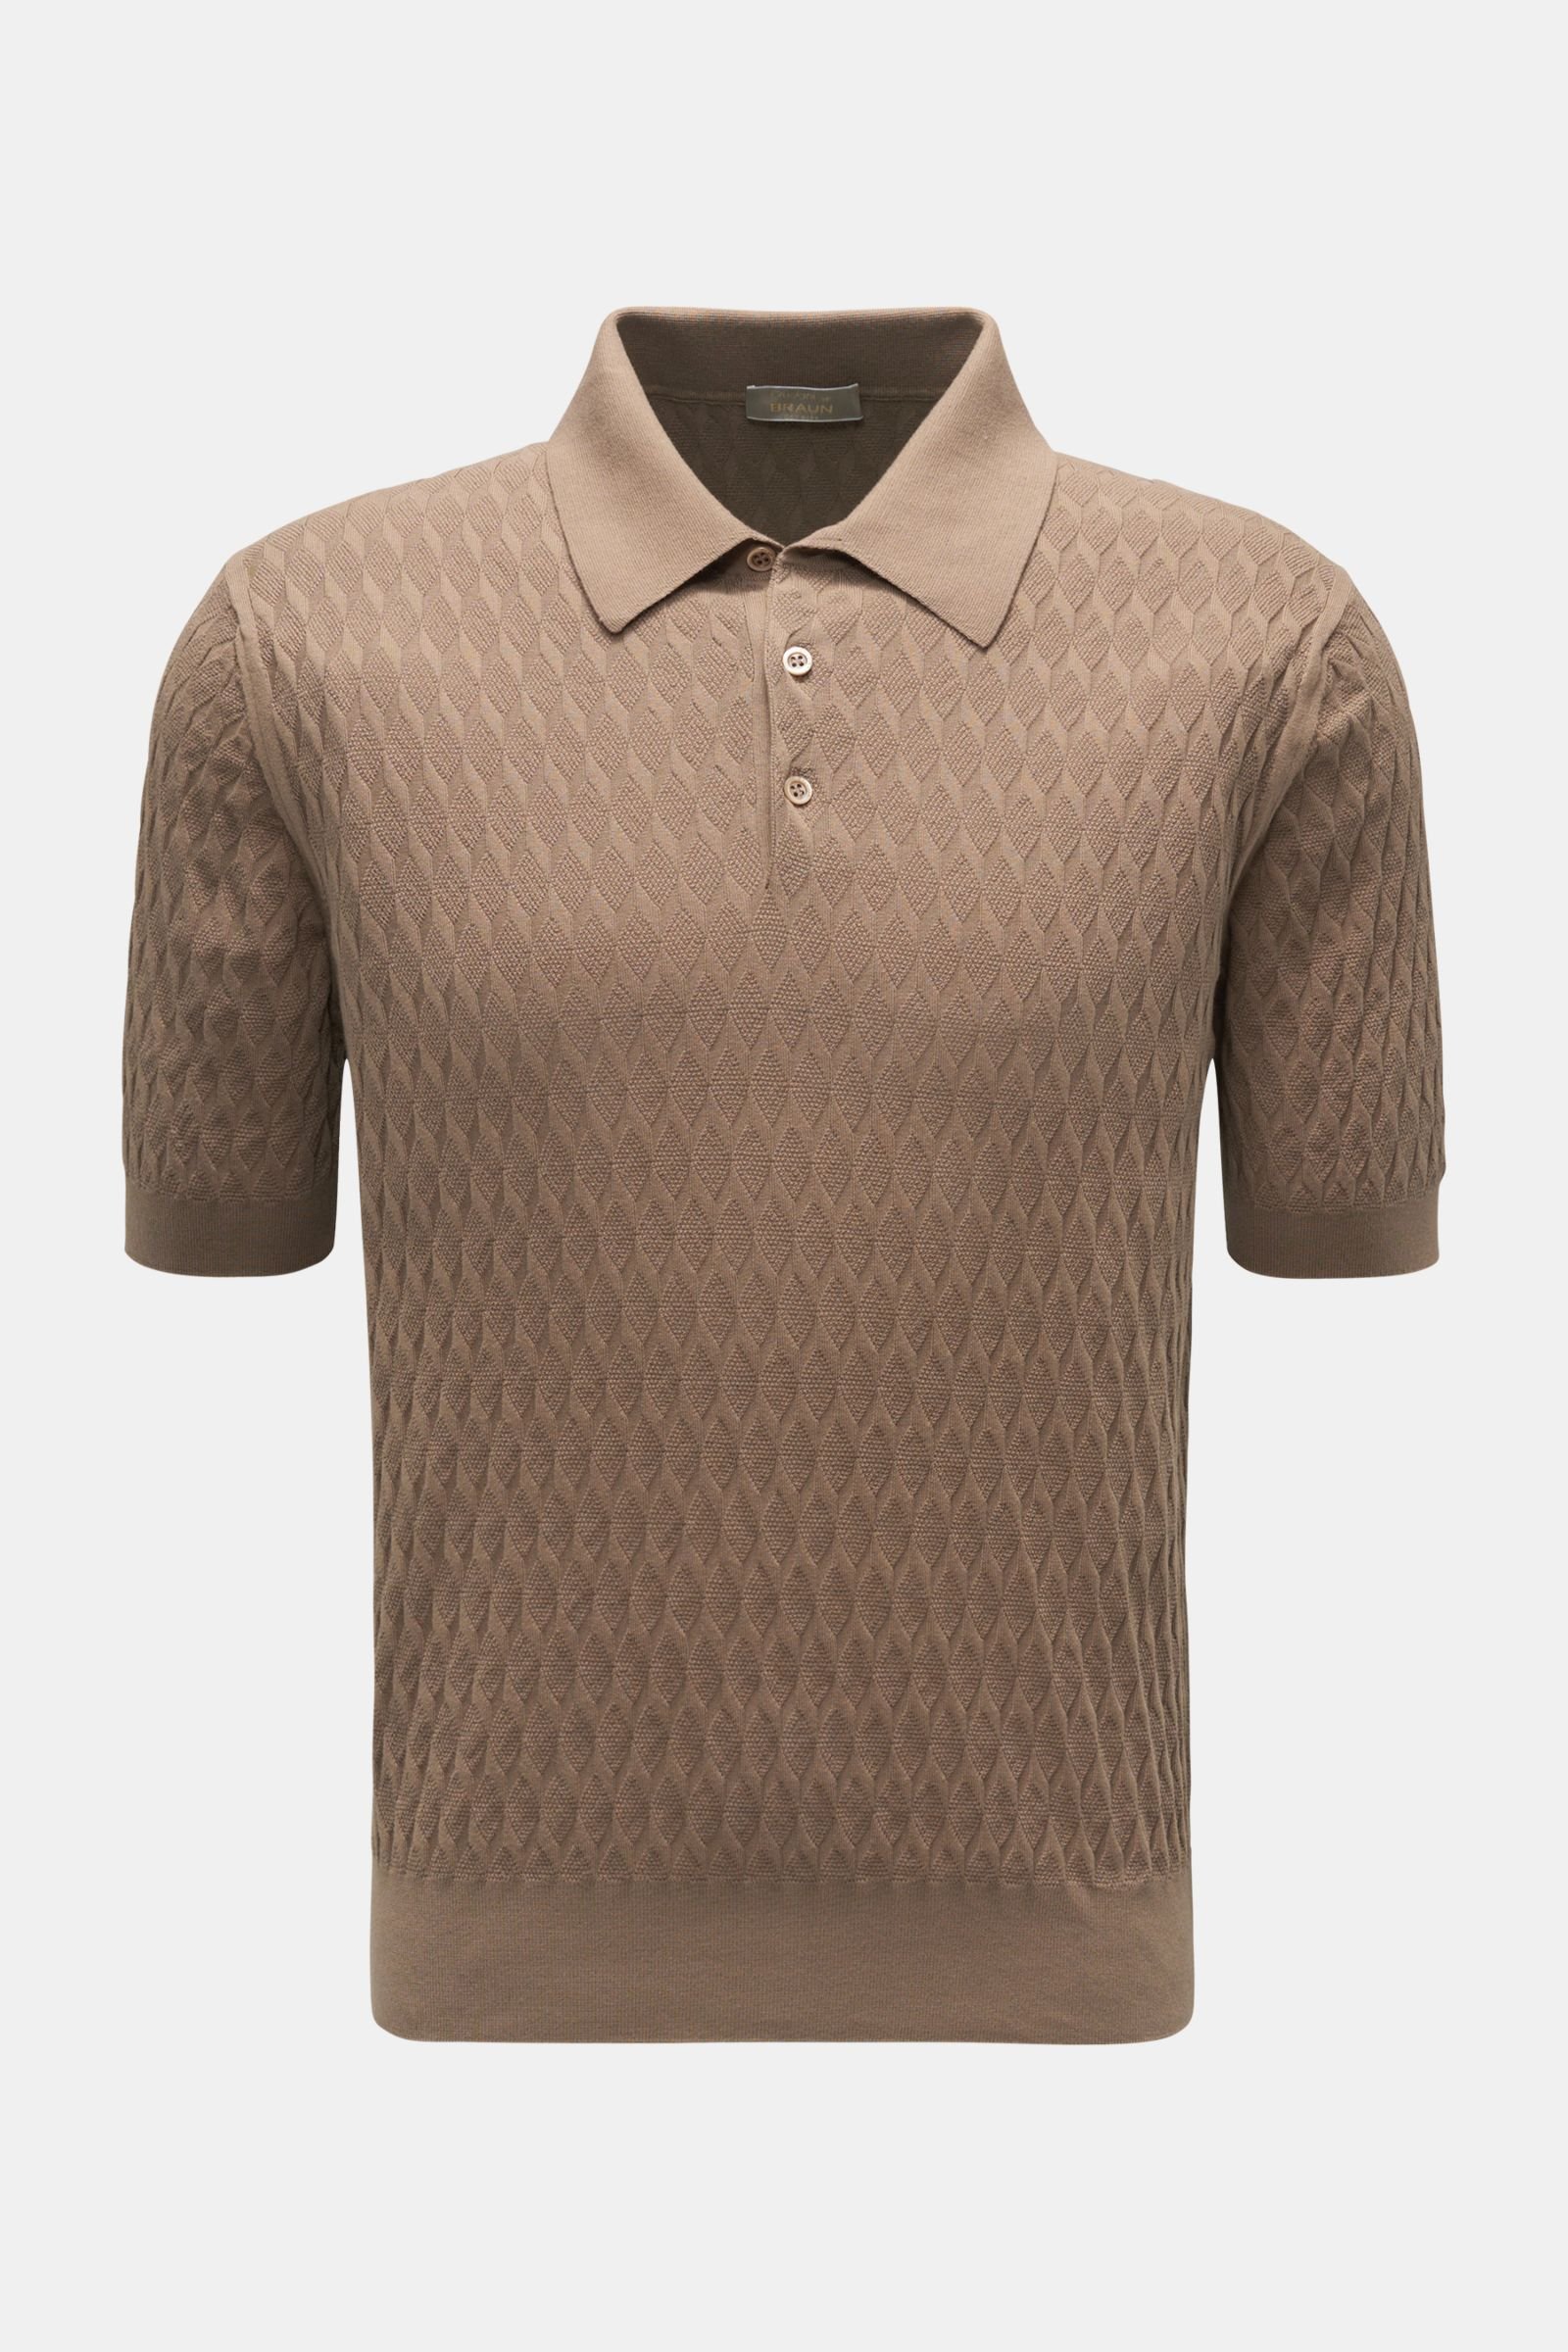 Short sleeve knit polo grey-brown patterned